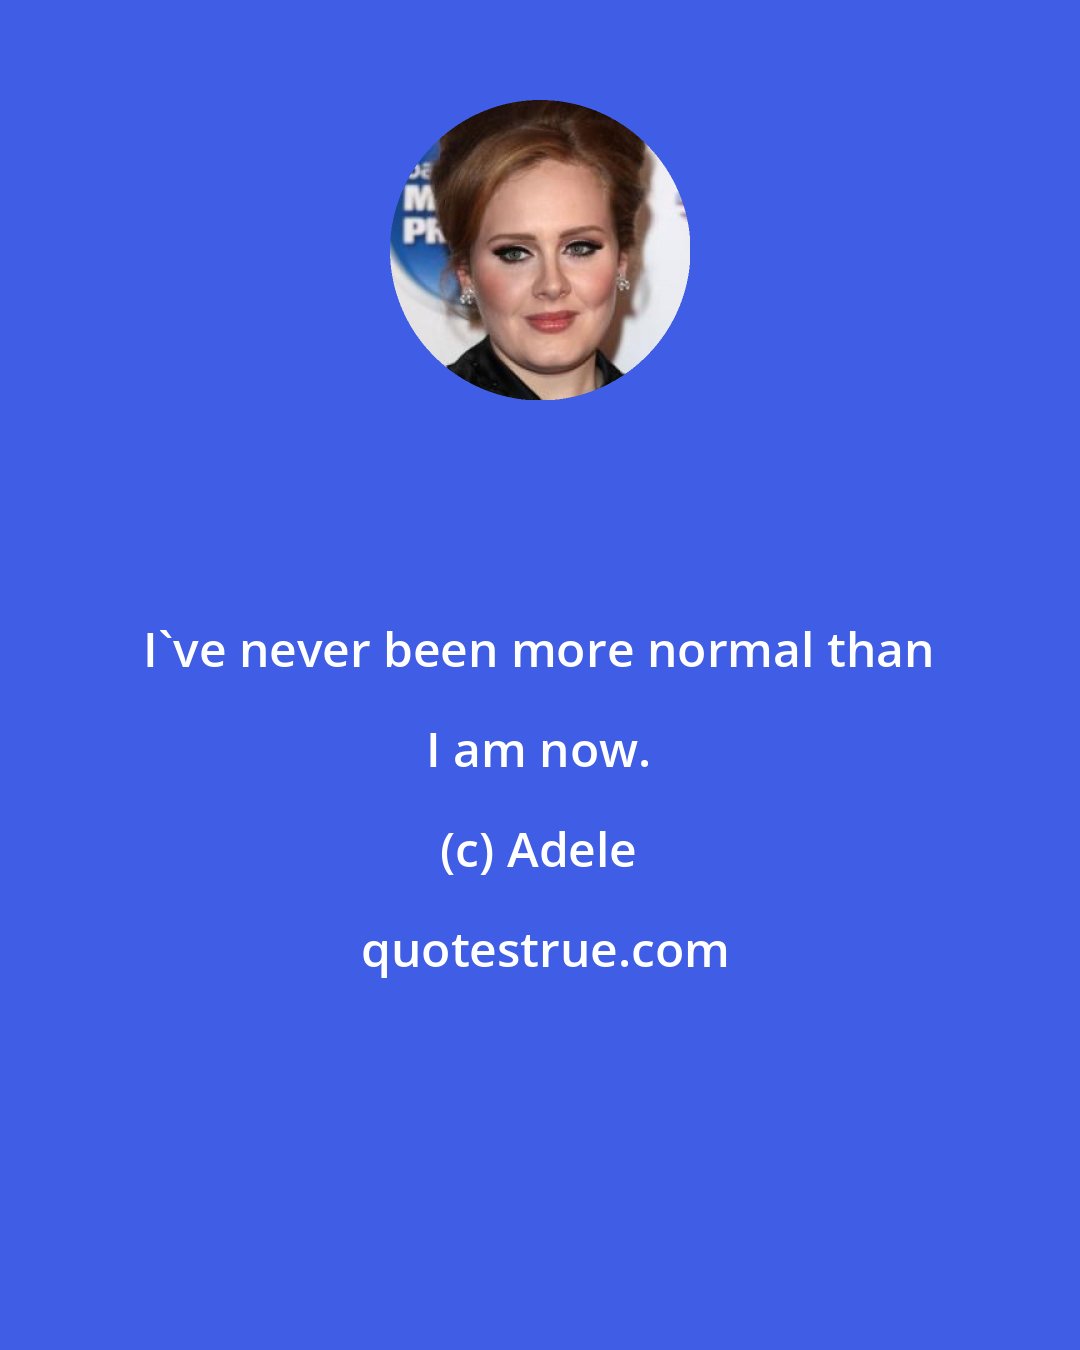 Adele: I've never been more normal than I am now.